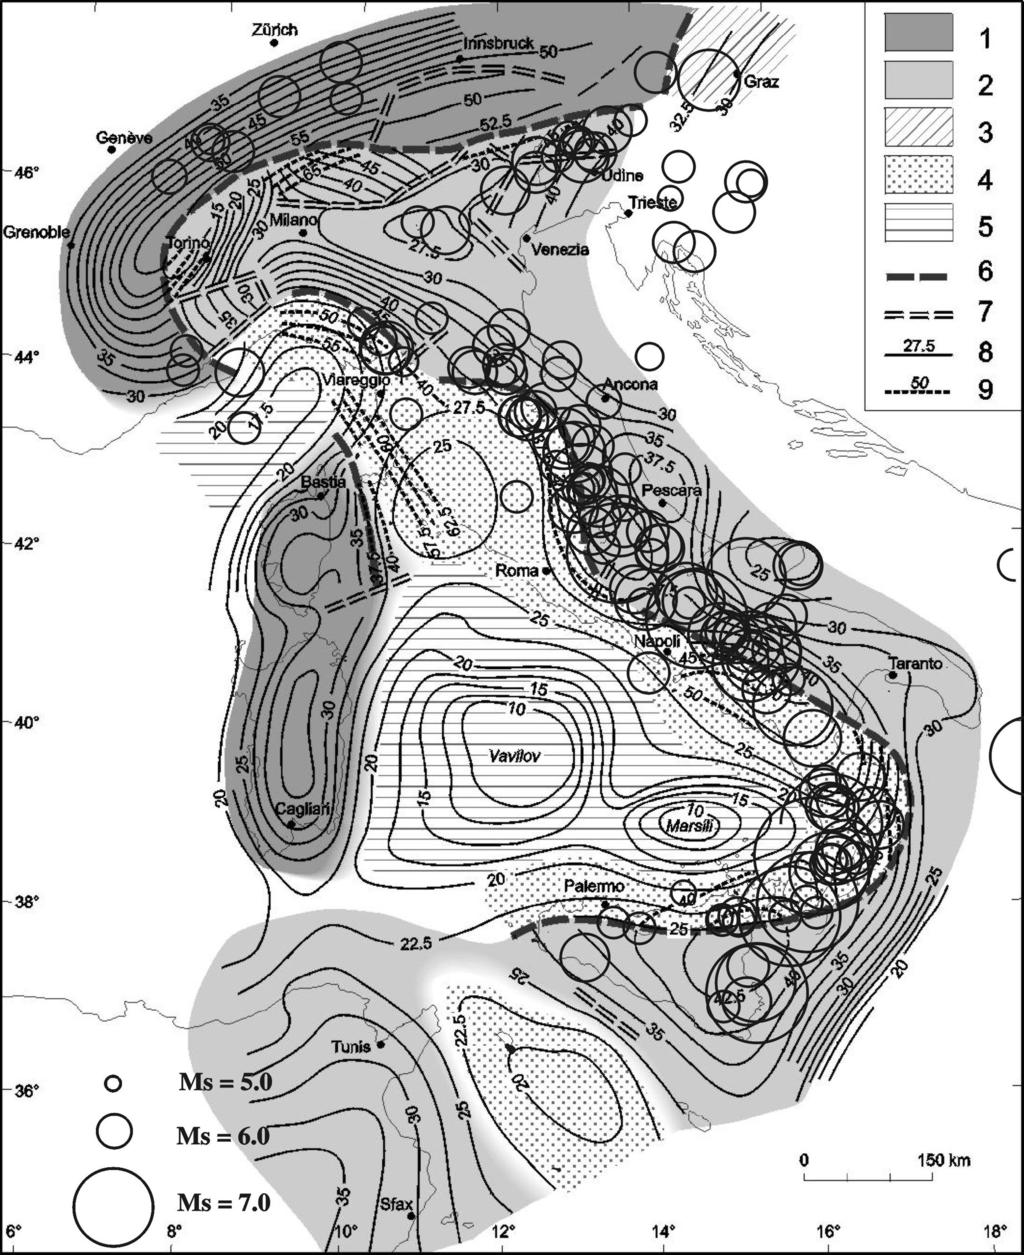 Boll. Geof. Teor. Appl., 47, 481-496 Cassinis and Solarino Fig. 2 - Depth contour-lines of the Moho boundary (contour interval 2.5 km) and crustal domains (modified from Cassinis et al., 2003).